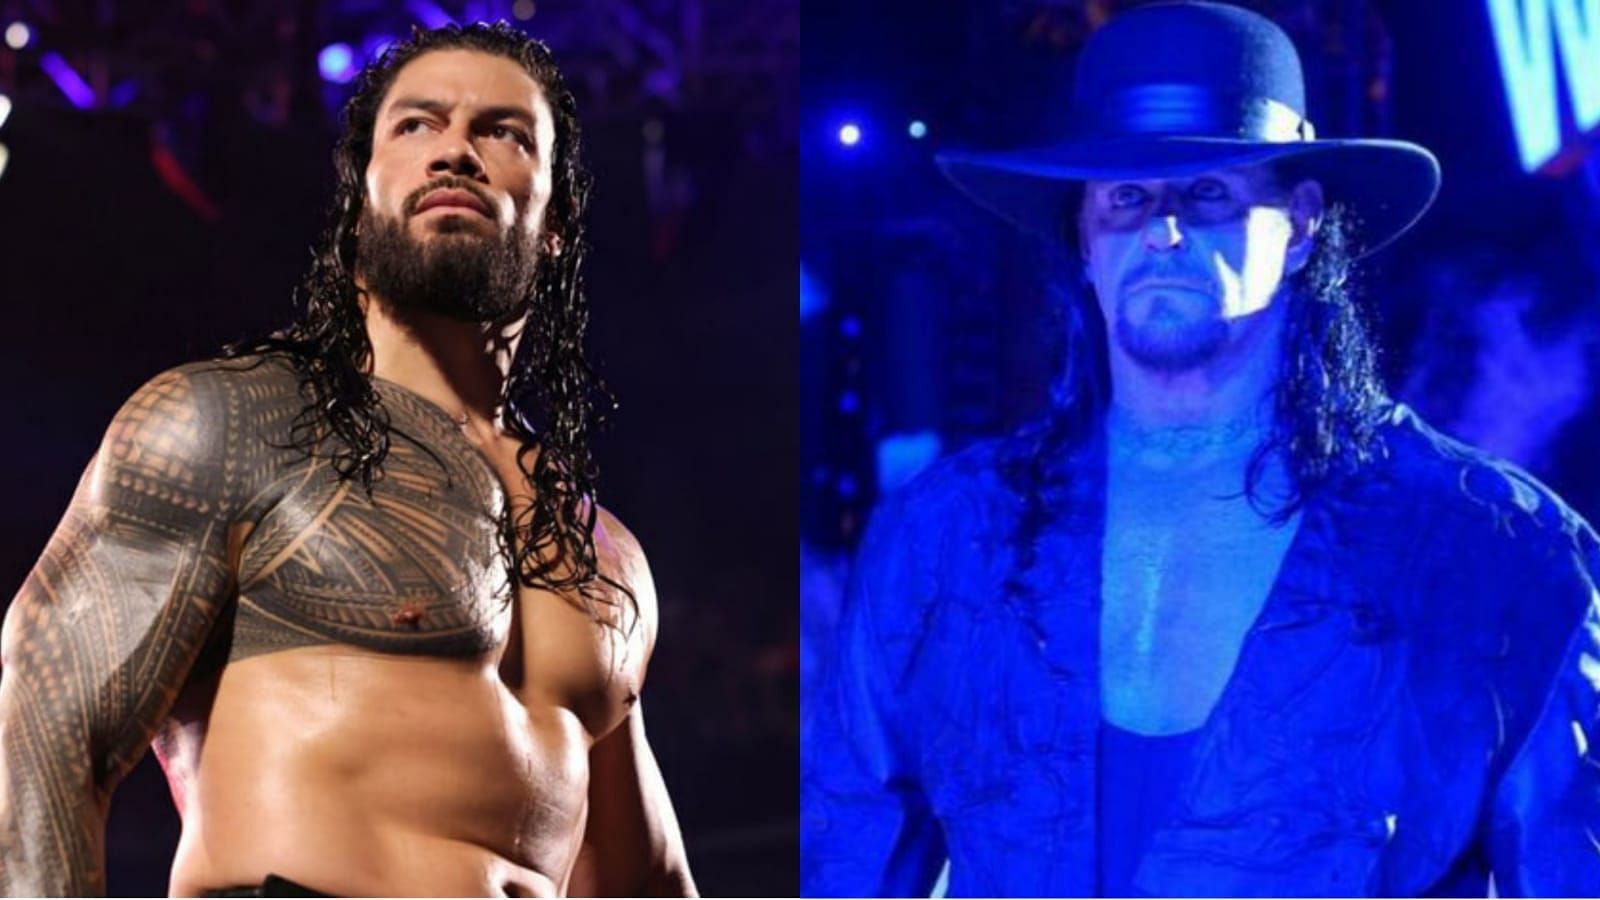 Roman Reigns (left); The Undertaker (right)